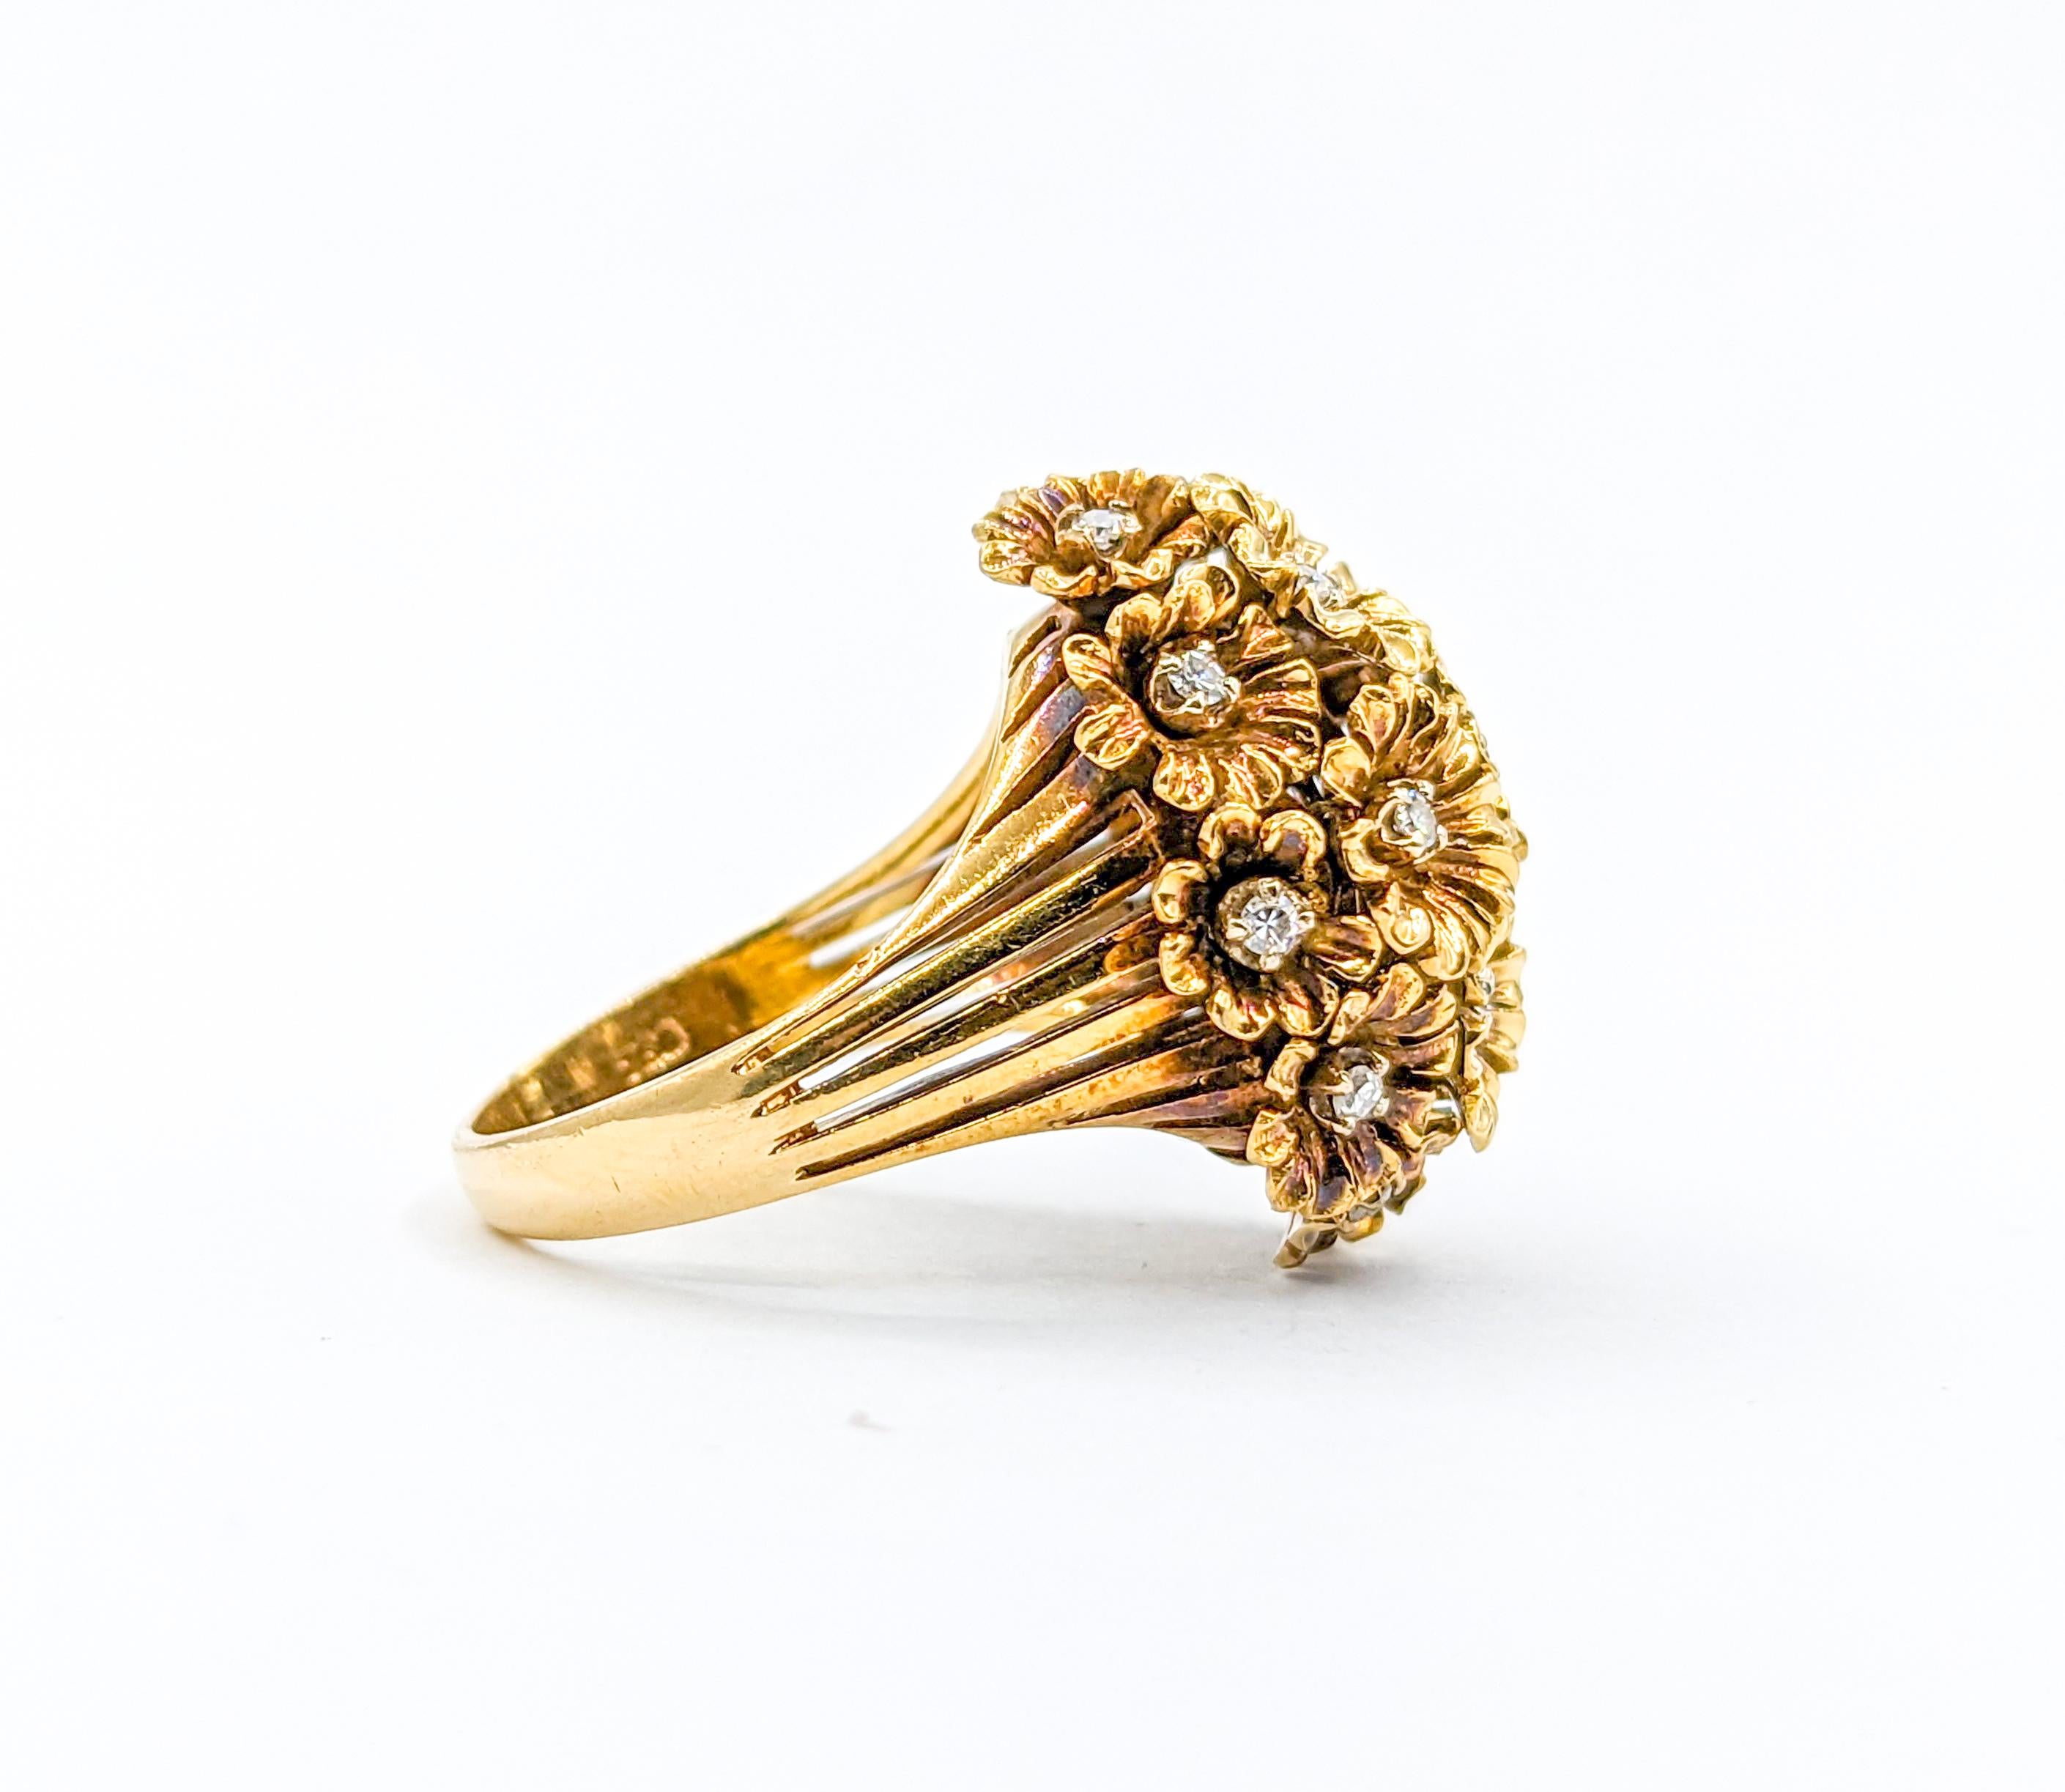 Whimsical Tremblant Flower Cluster Diamond Ring in 18K Gold In Excellent Condition For Sale In Bloomington, MN